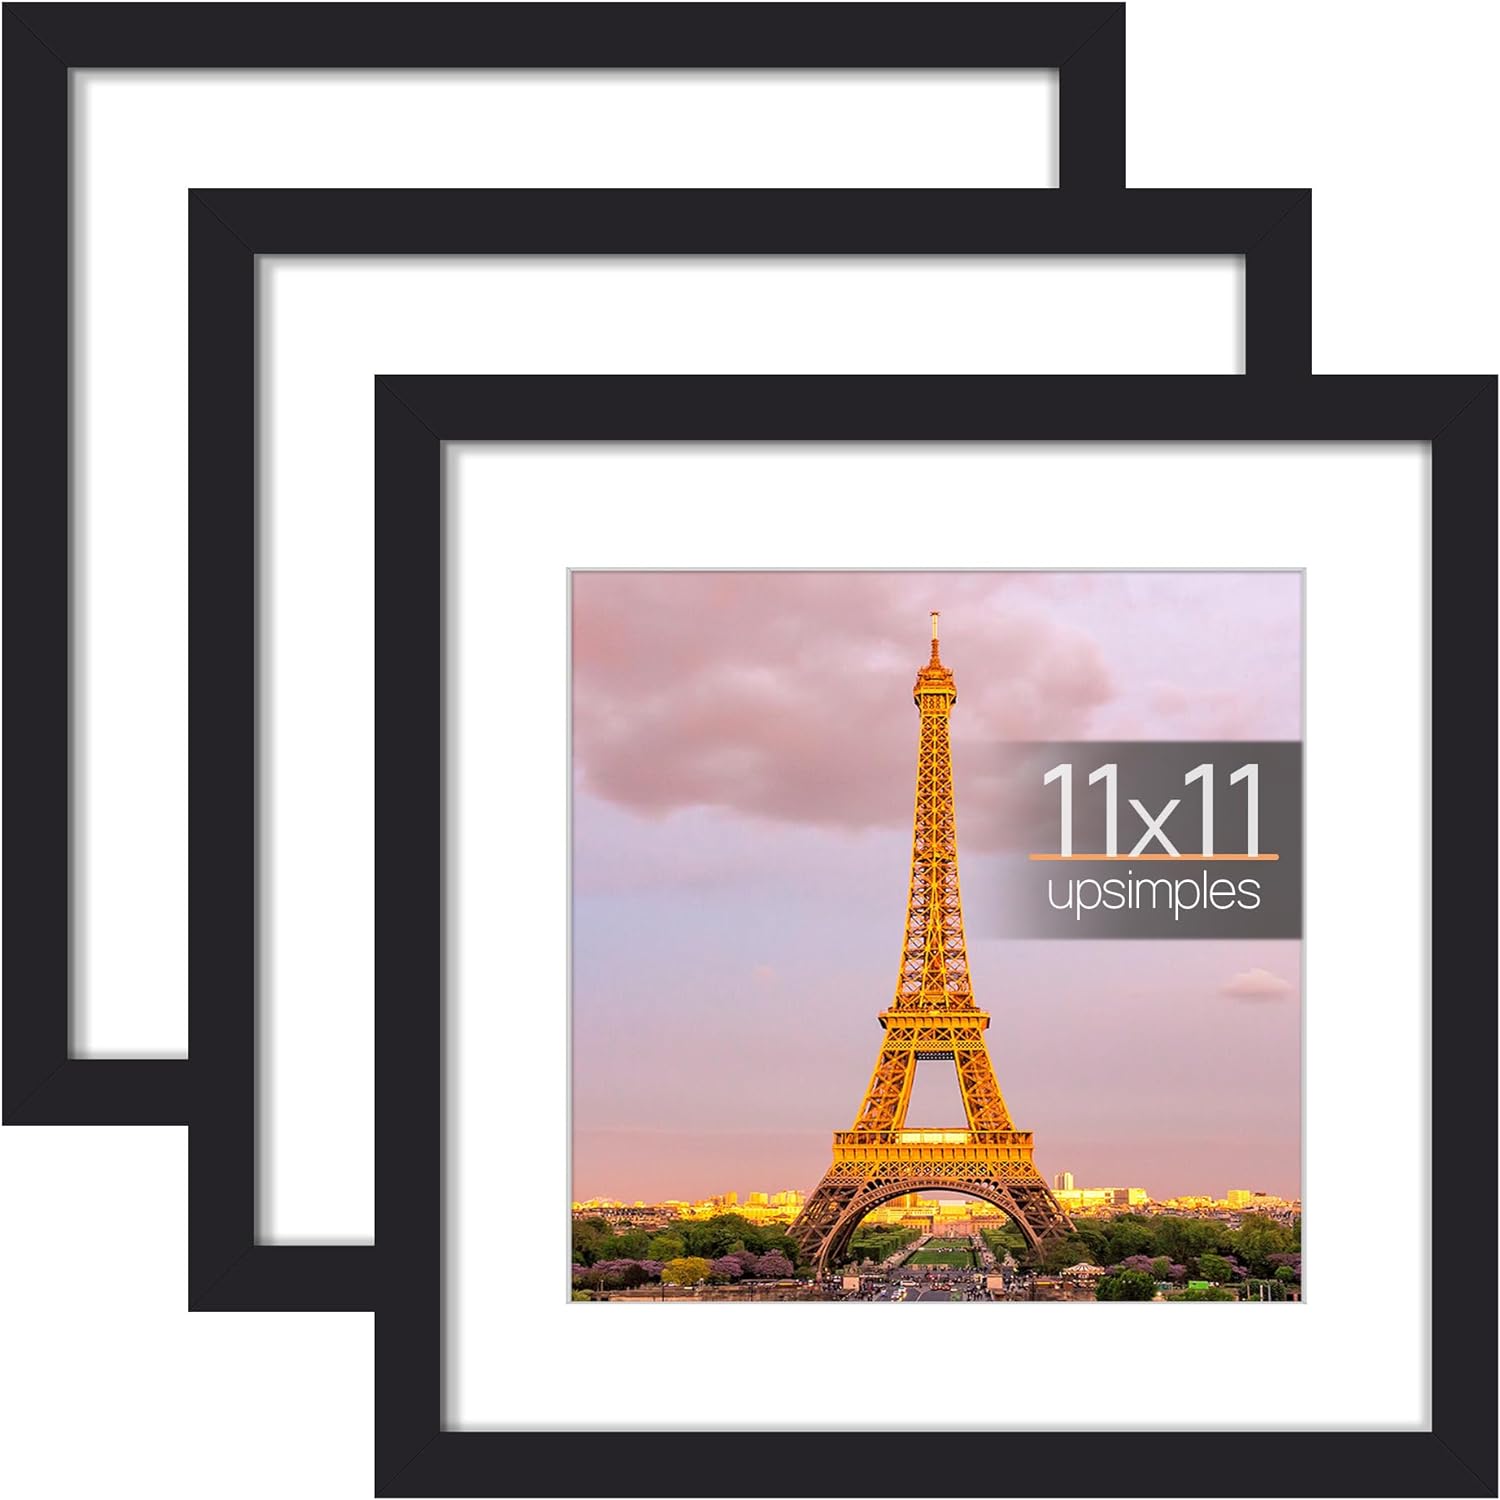 upsimples 11x14 Picture Frame Set of 3, Made of High Definition ...